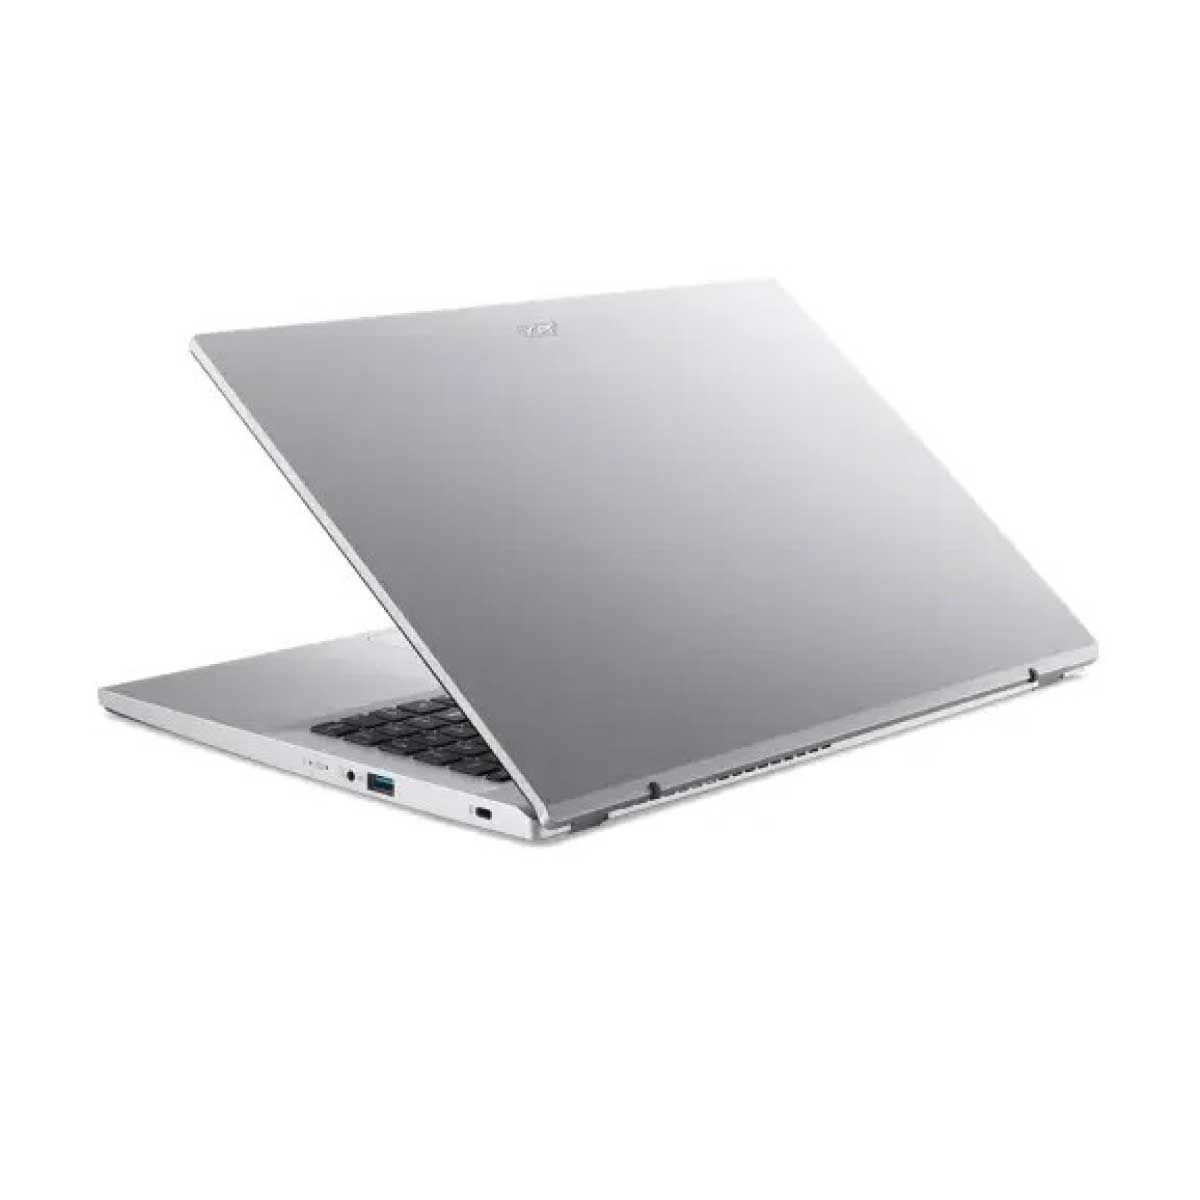 NOTEBOOK (โน้ตบุ๊ค) ACER ASPIRE 3 A315-59-32GC (PURE SILVER)